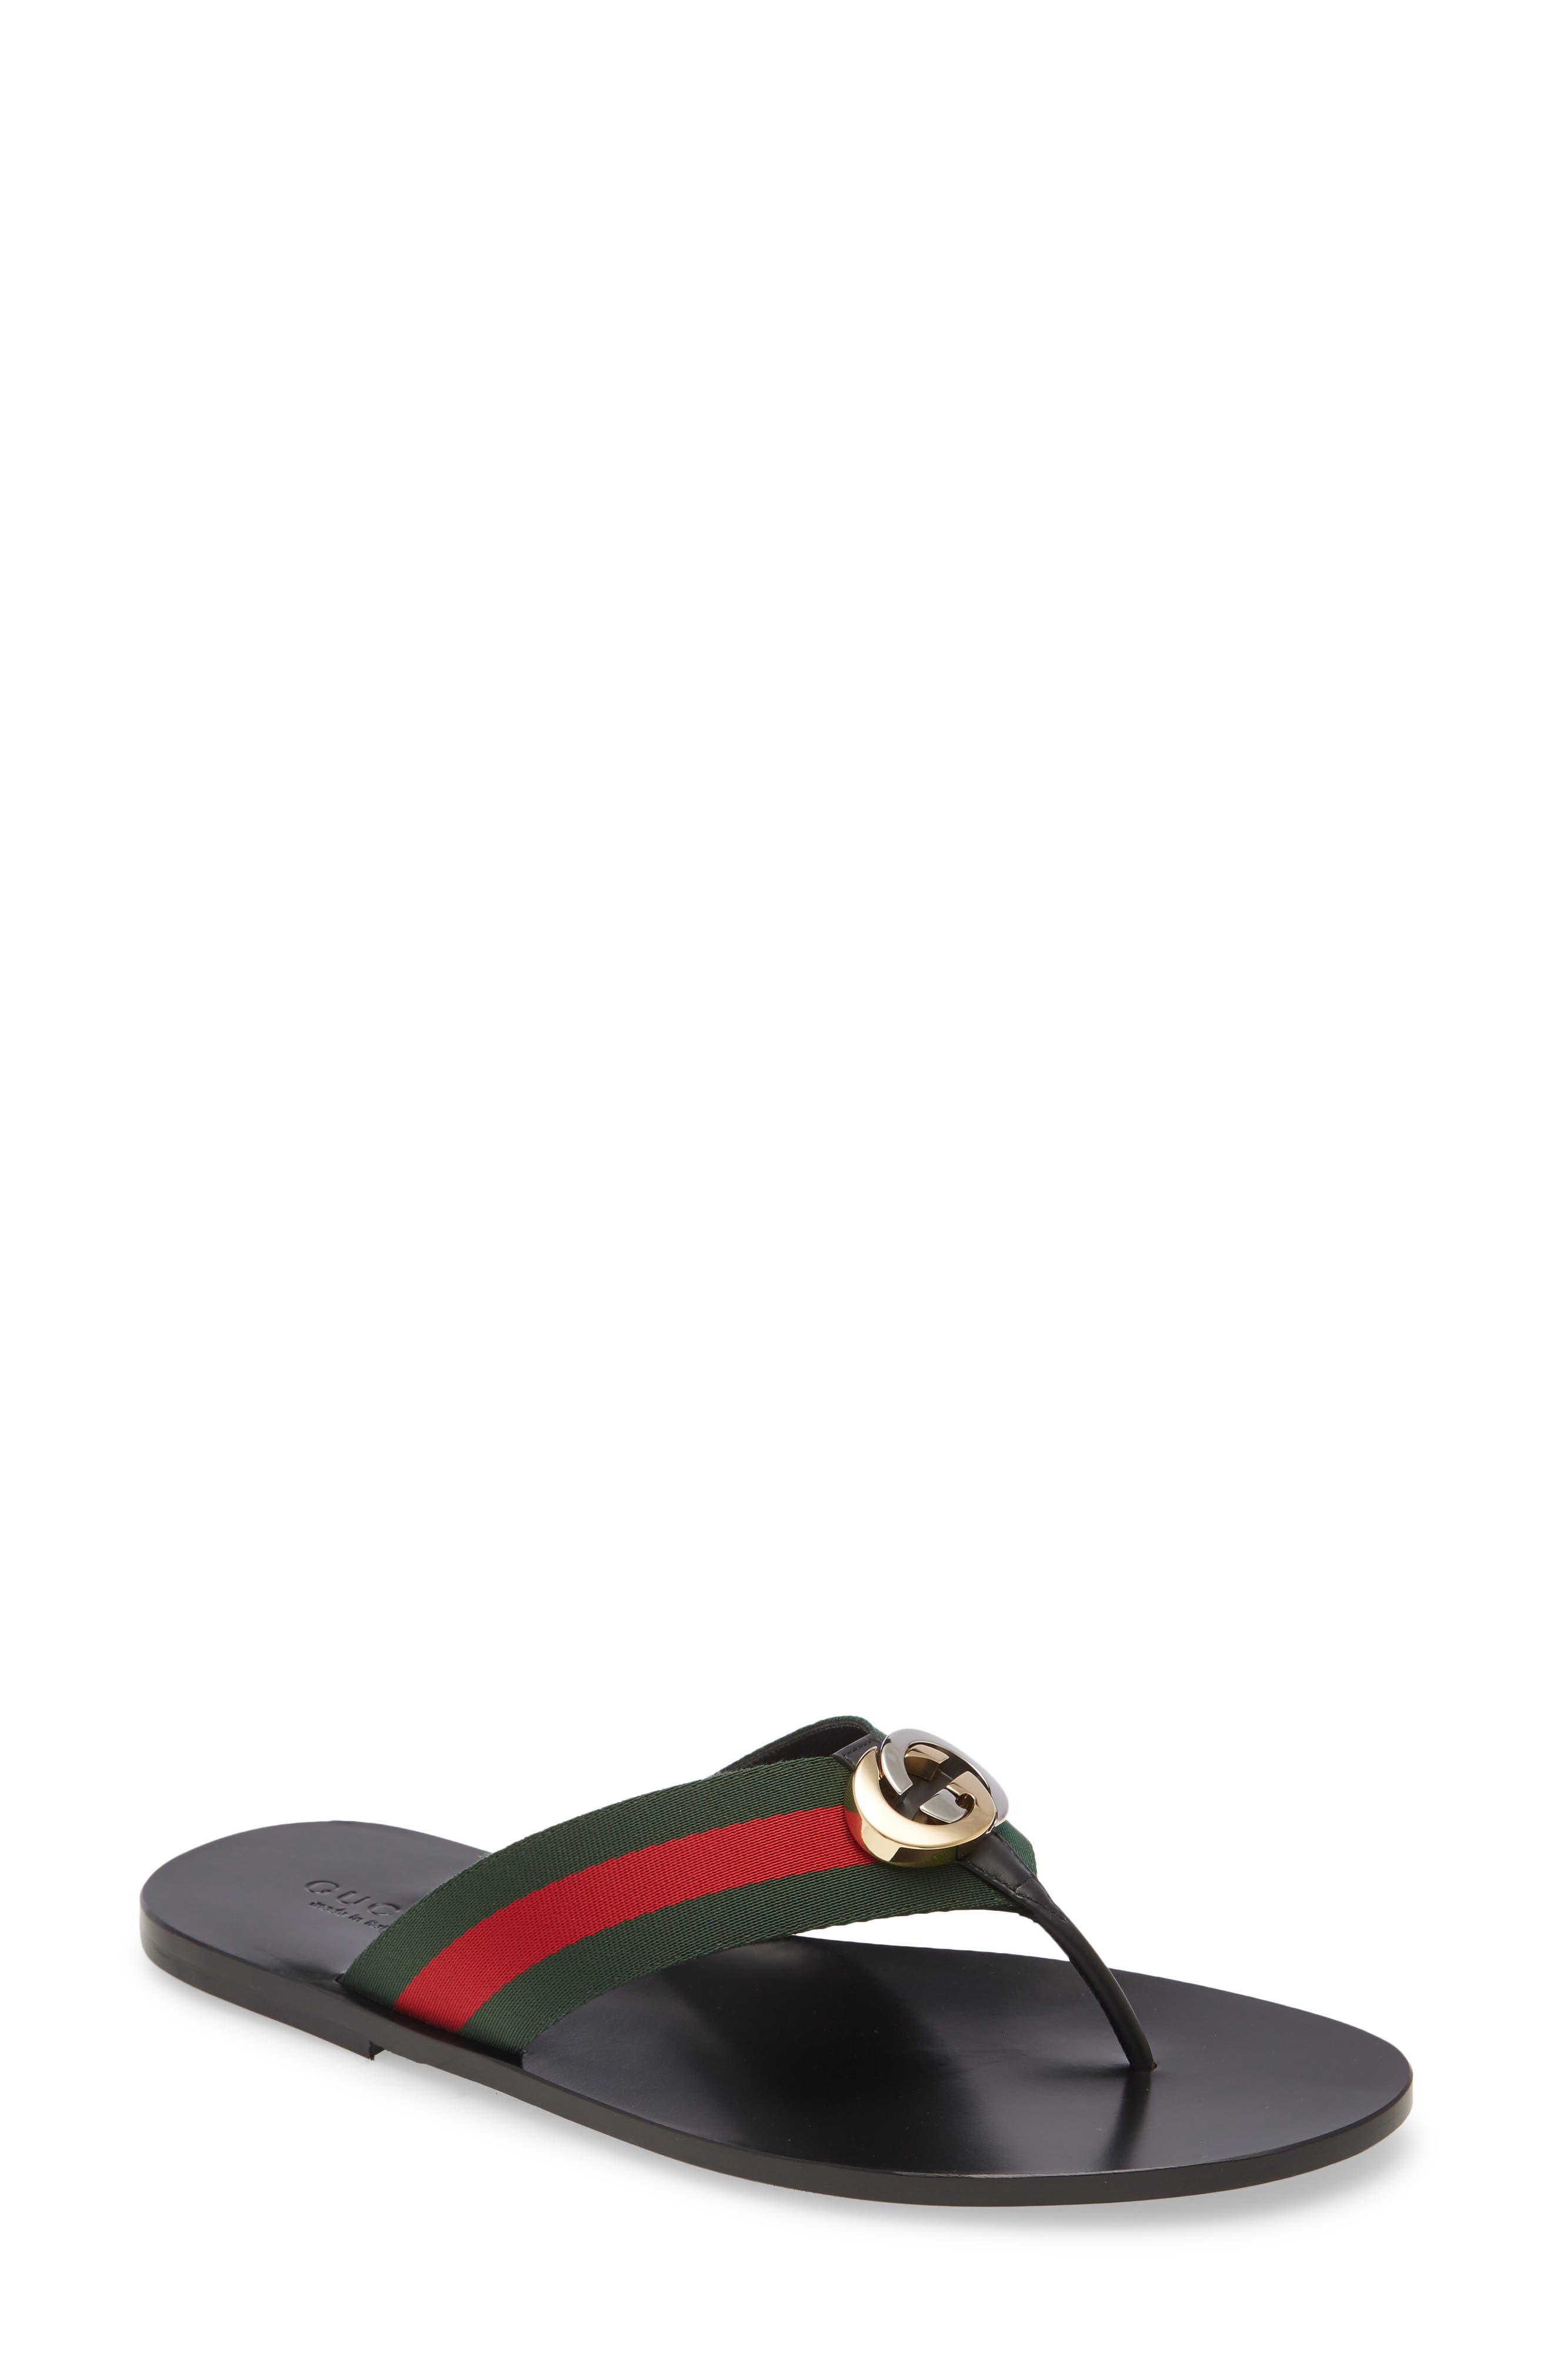 gucci slippers for men price